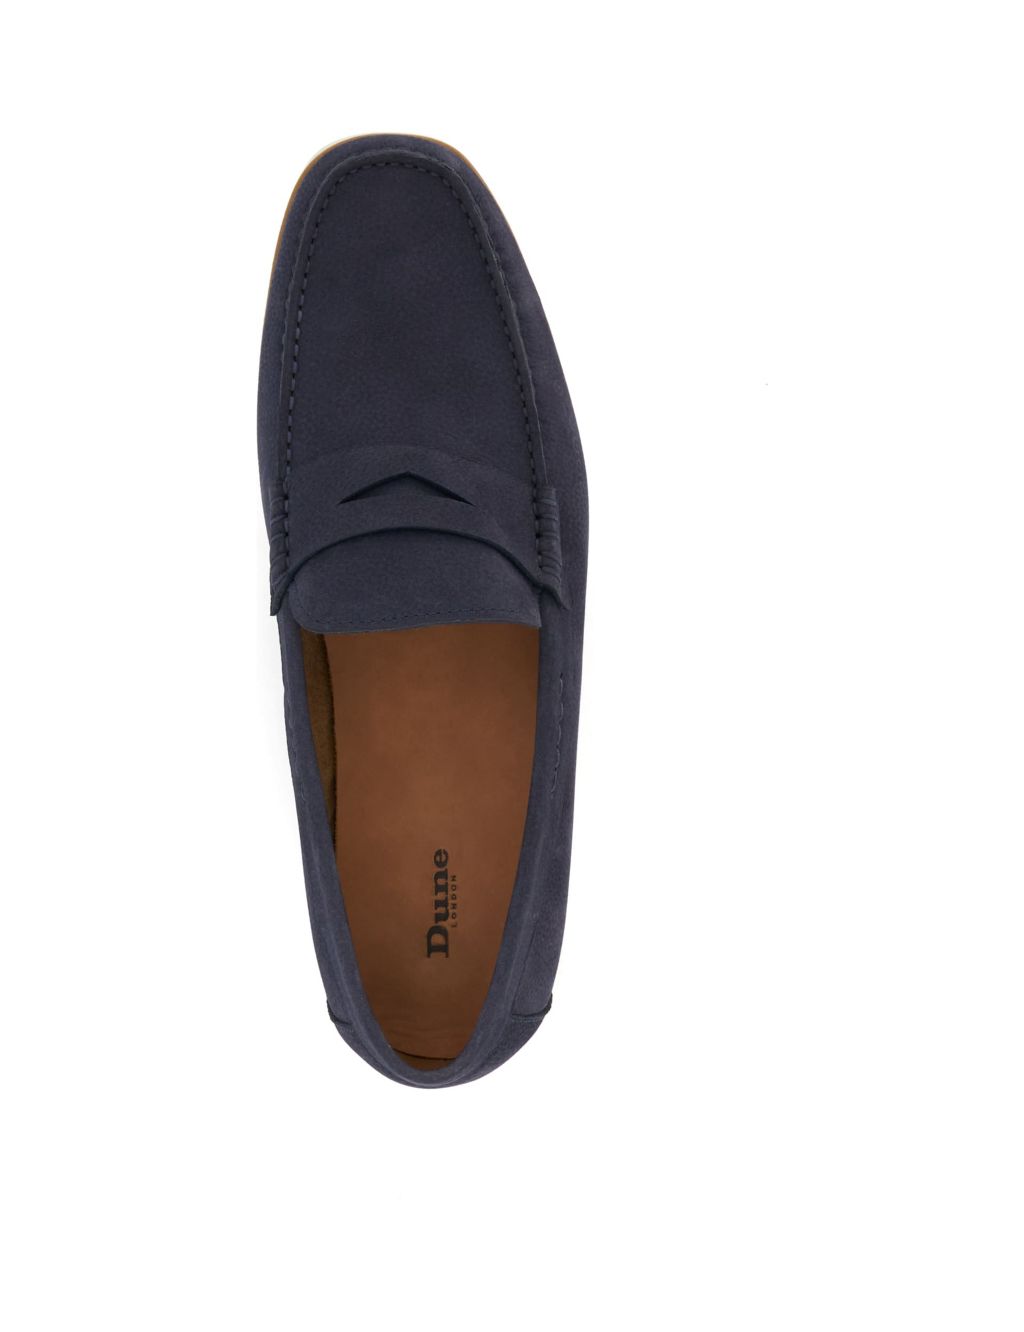 Leather Slip-On Loafers 5 of 6